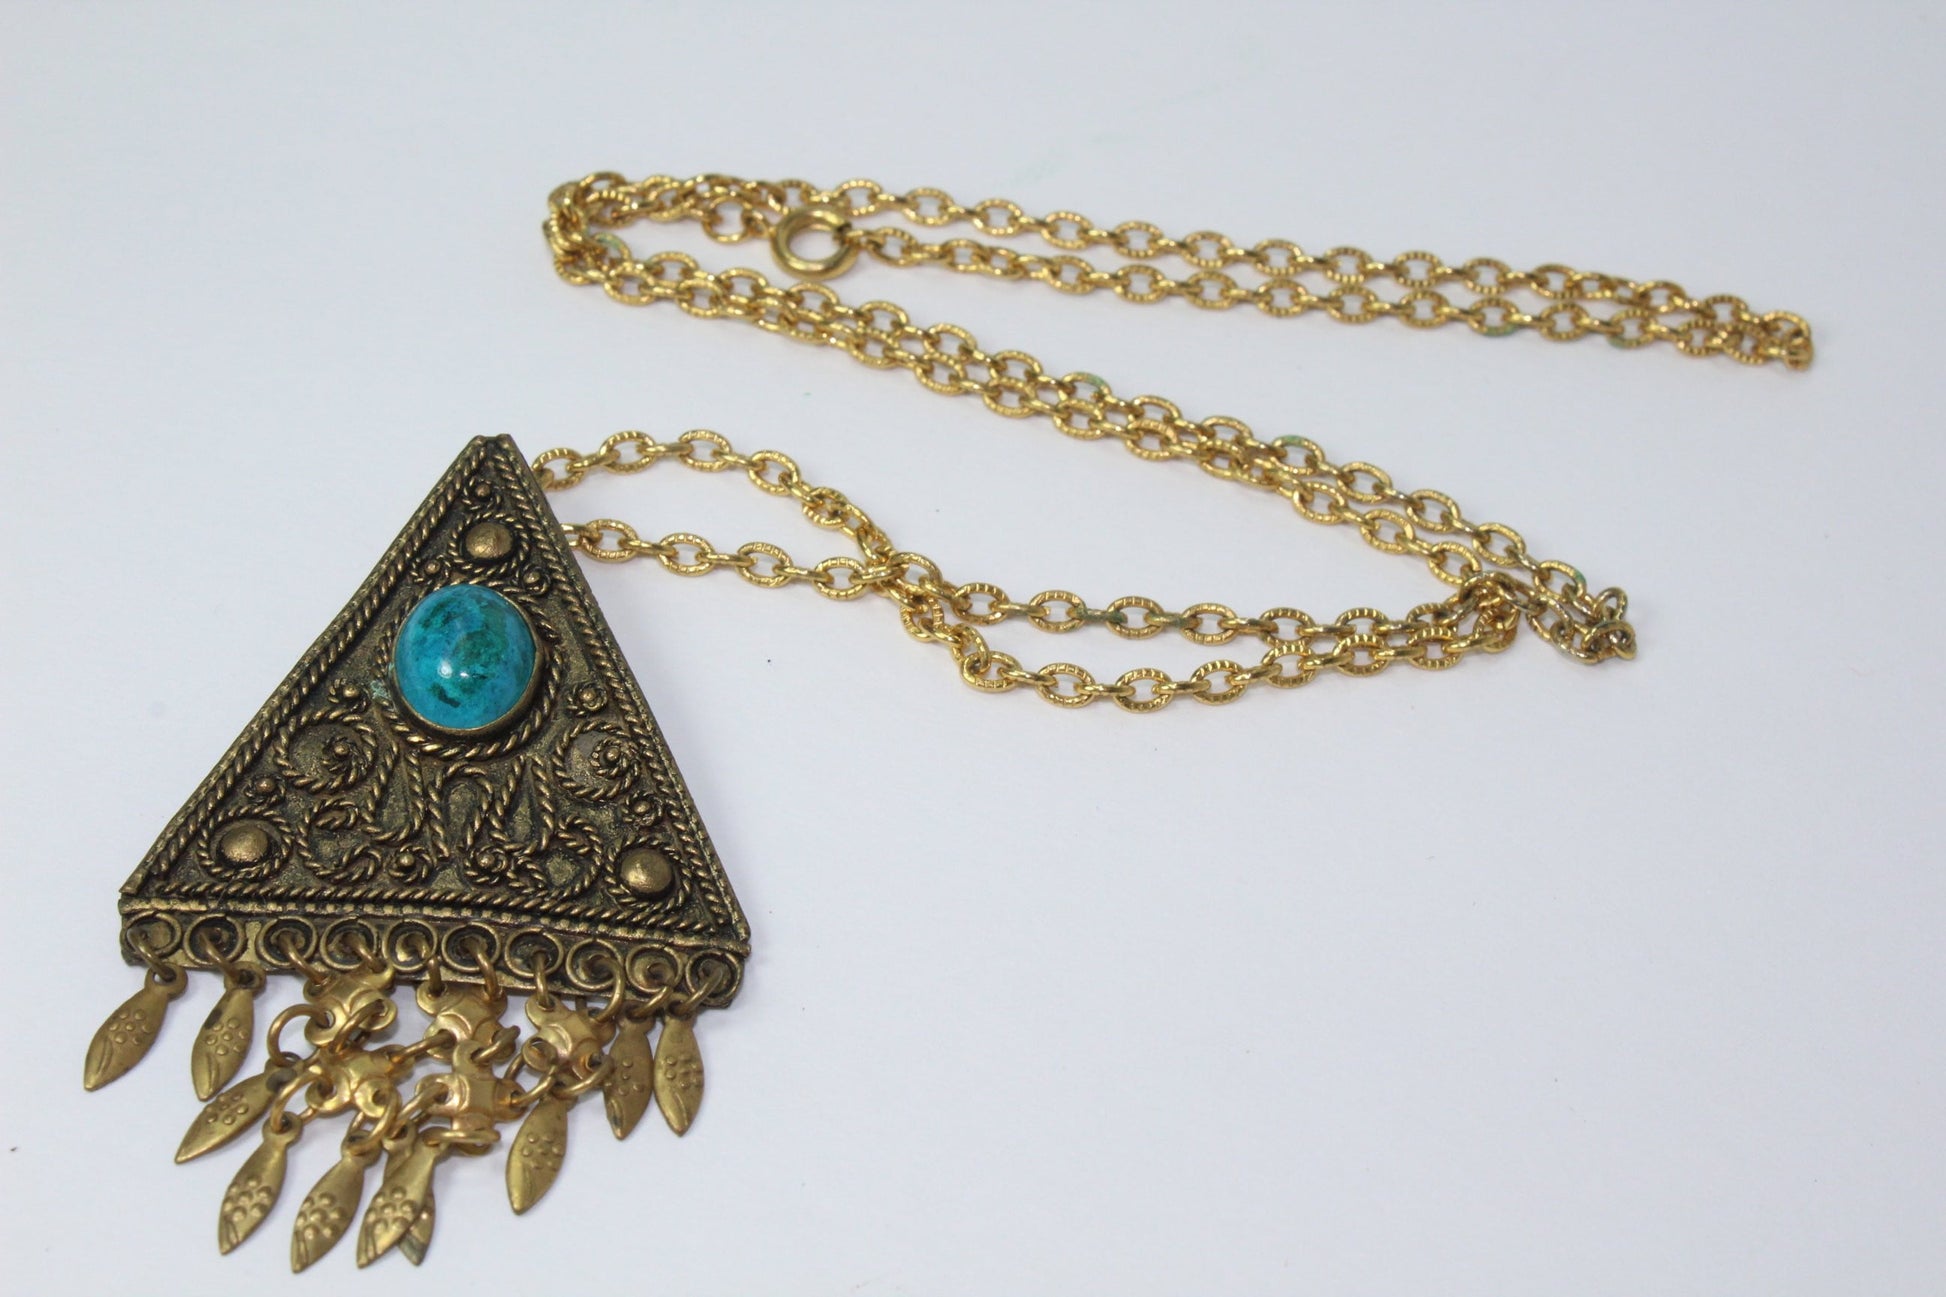 Necklace Israel Turquoise Color Stone 24" Long Necklace Triangular Pendant Filigree